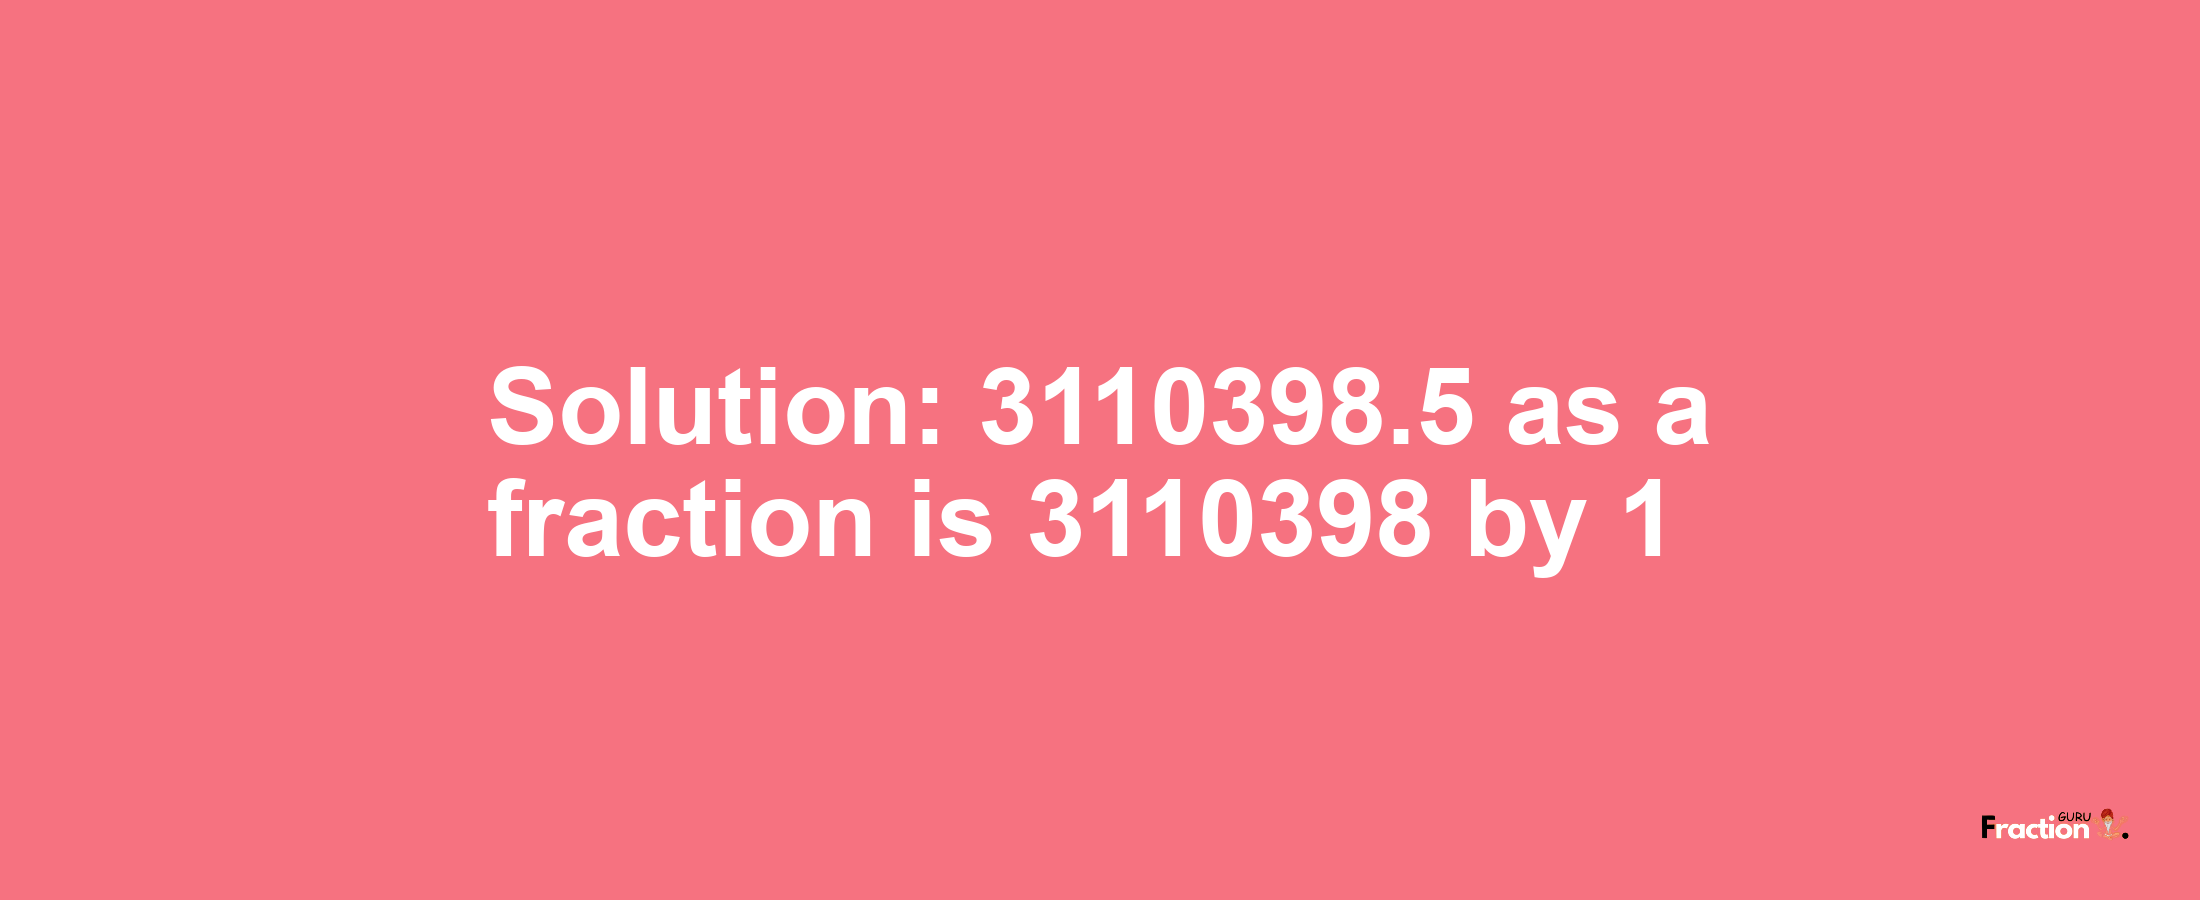 Solution:3110398.5 as a fraction is 3110398/1